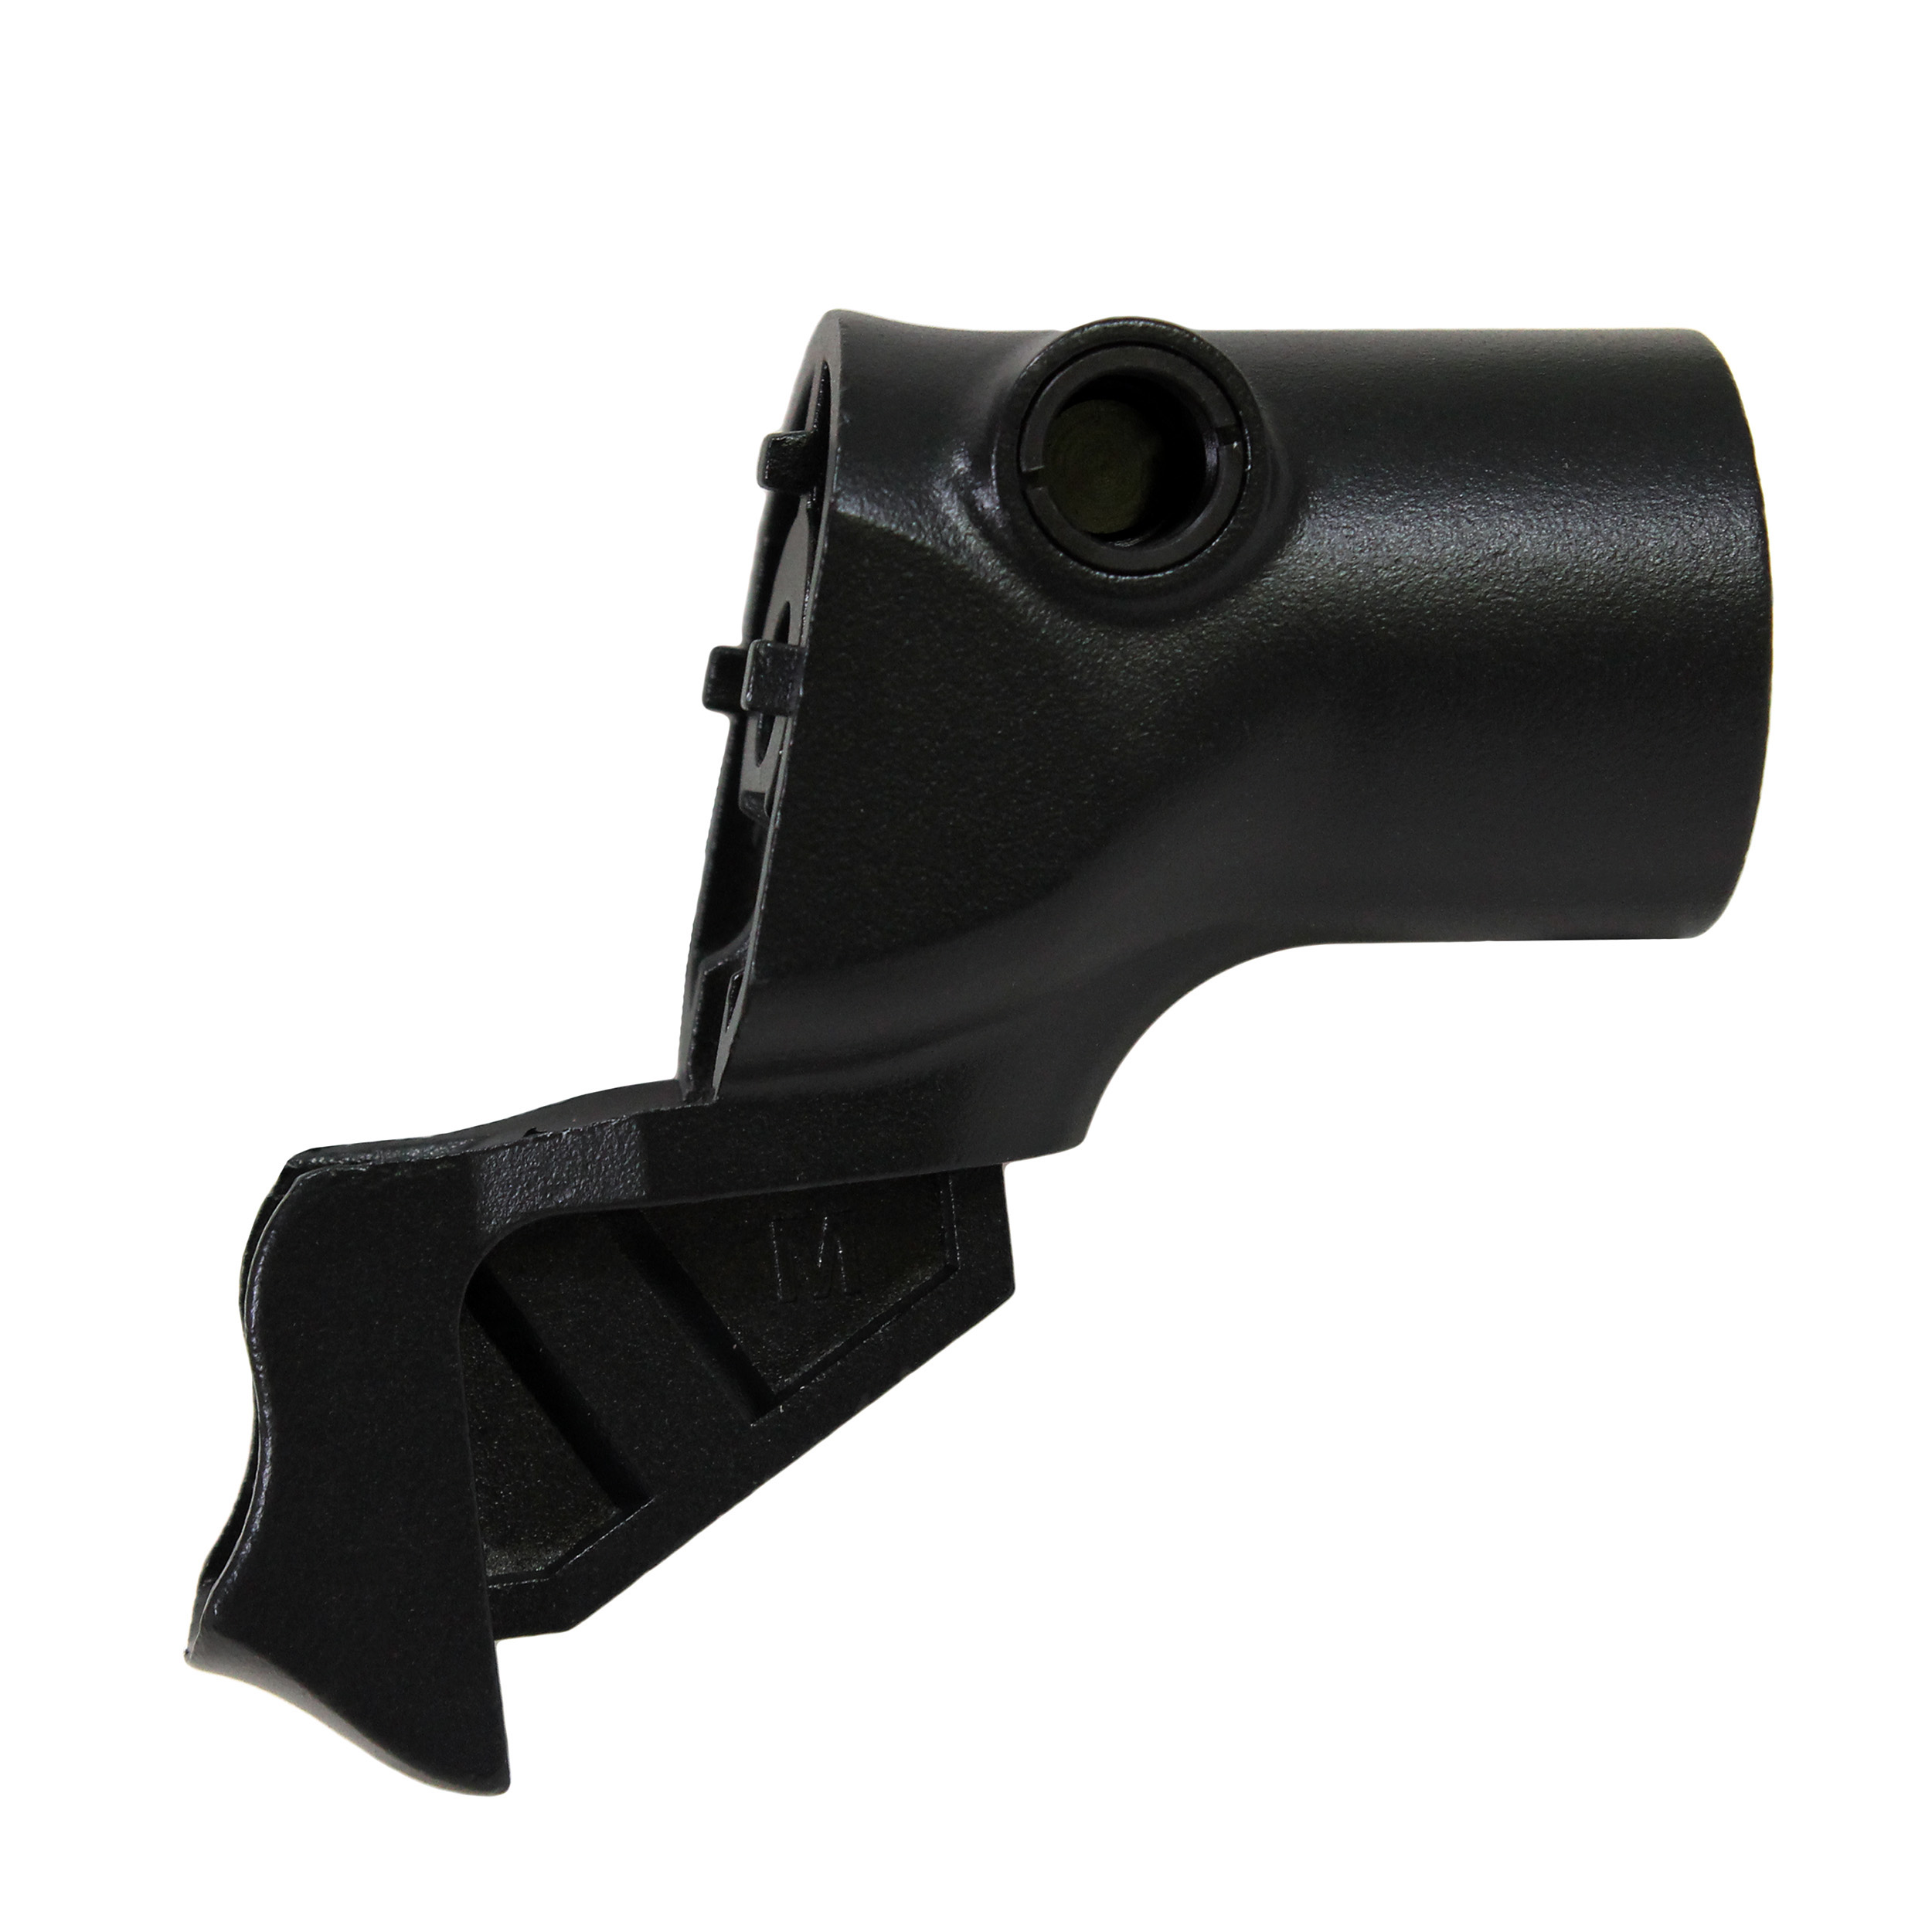 TacStar's Stock Adapters are designed to allow the use of any AR-15 ty...